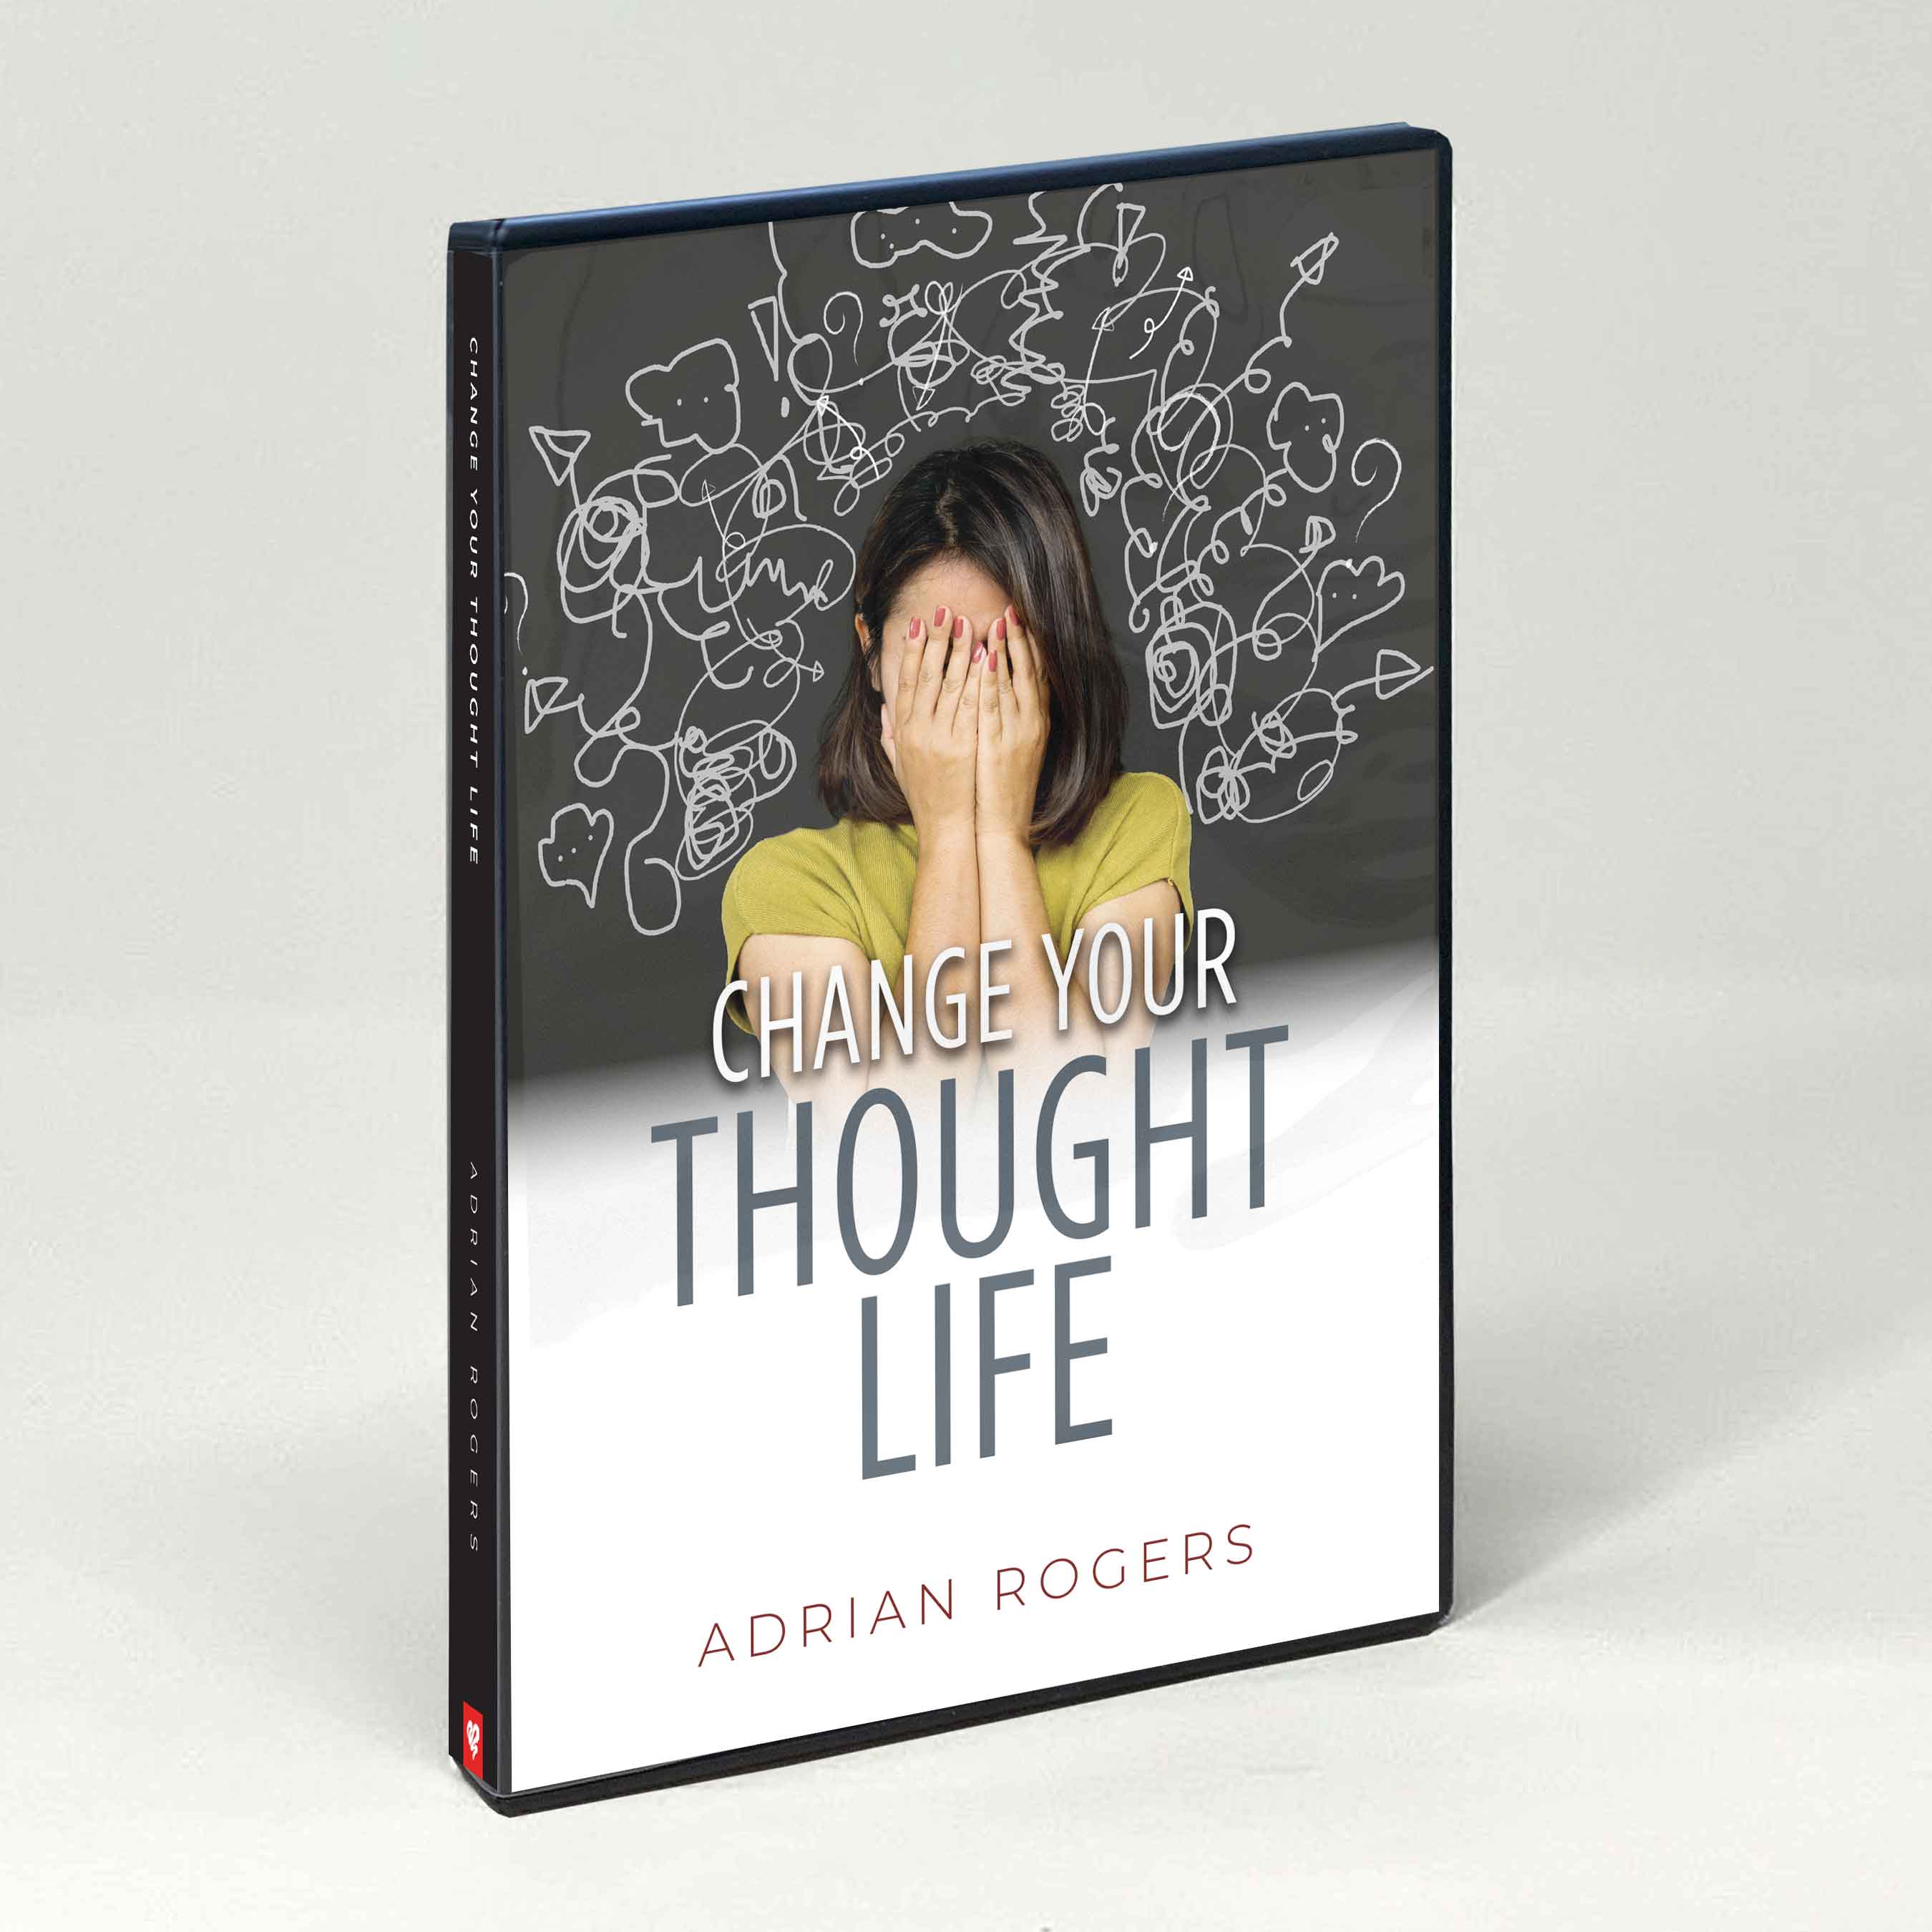 Change Your Thought Life Series